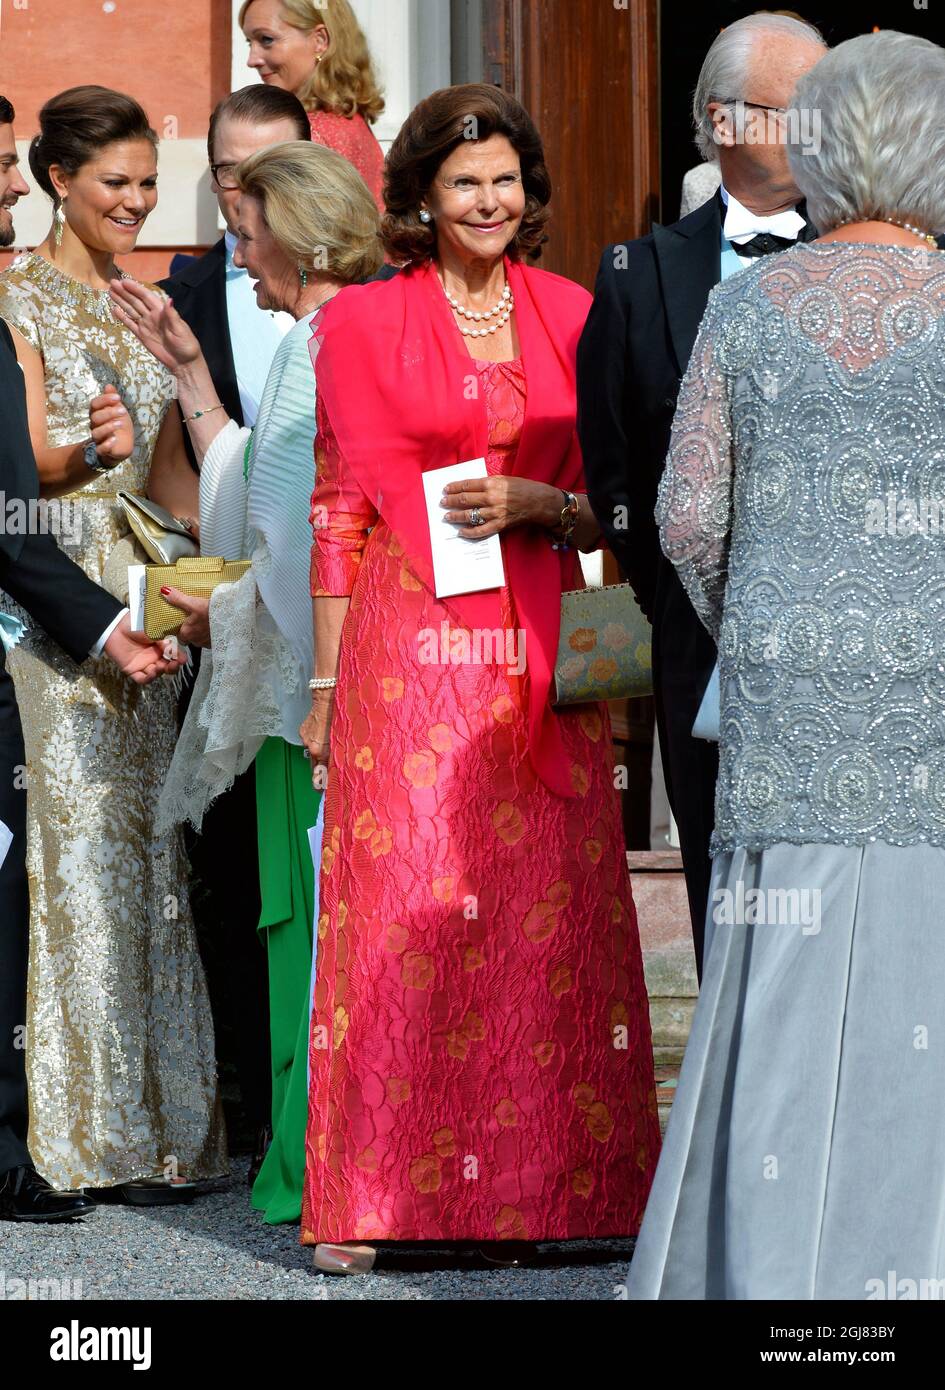 STOCKHOLM 2013-08-31 Prince Carl Philip, Crown Princess Victoria, Queen Sonja, Queen Silvia and King Carl Gustaf after the wedding at the Ulriksdal Palace Chapel in Stockholm, Sweden, August 31, 2013. The Swedish Kings godson Gustaf Magnuson (son of Princess Christina and Tord Magnuson) married model Vicky AndrÃ©n Saturday. Photo Jonas Ekstromer / SCANPIX / ** SWEDEN OUT ** Stock Photo